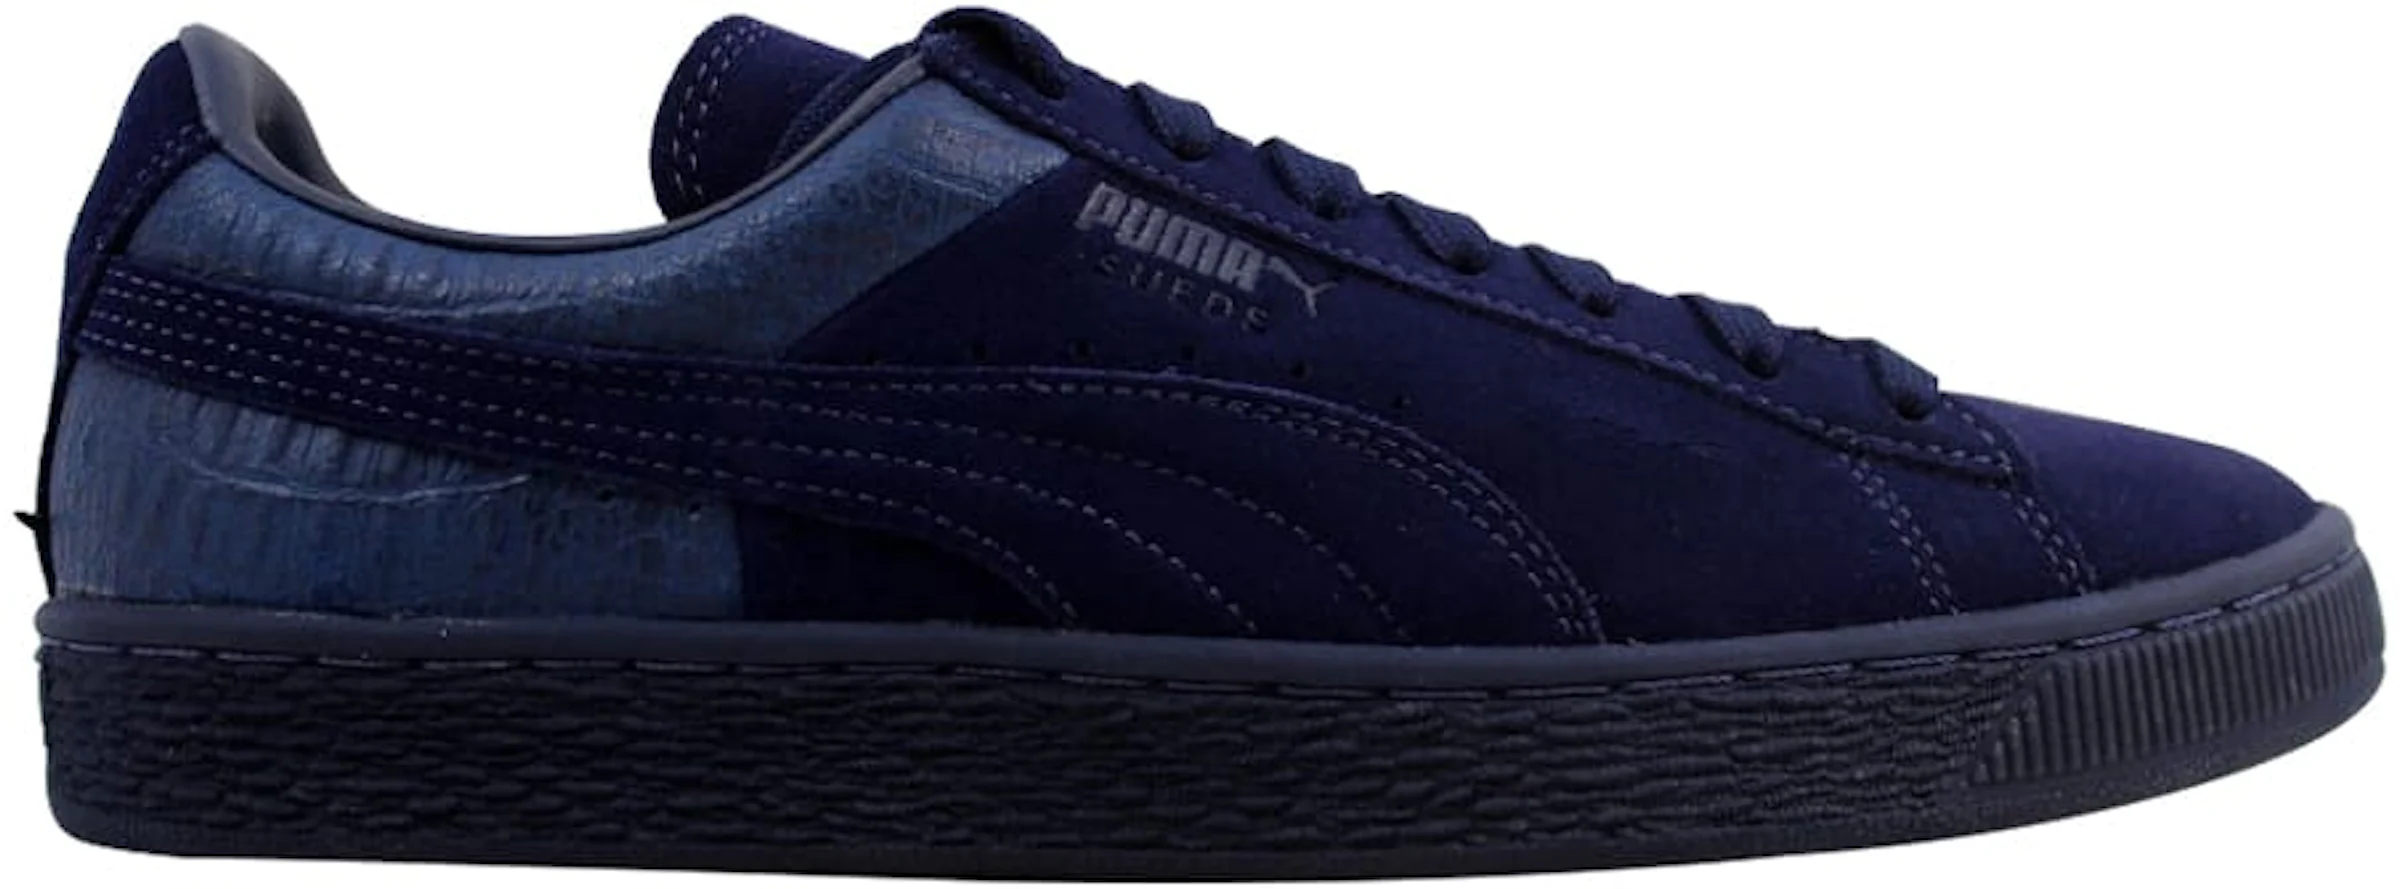 PUMA SUEDE CLASSIC TRAINERS - BLACK, BLUE, BURGUNDY, GREY, NAVY, GREEN &  MORE